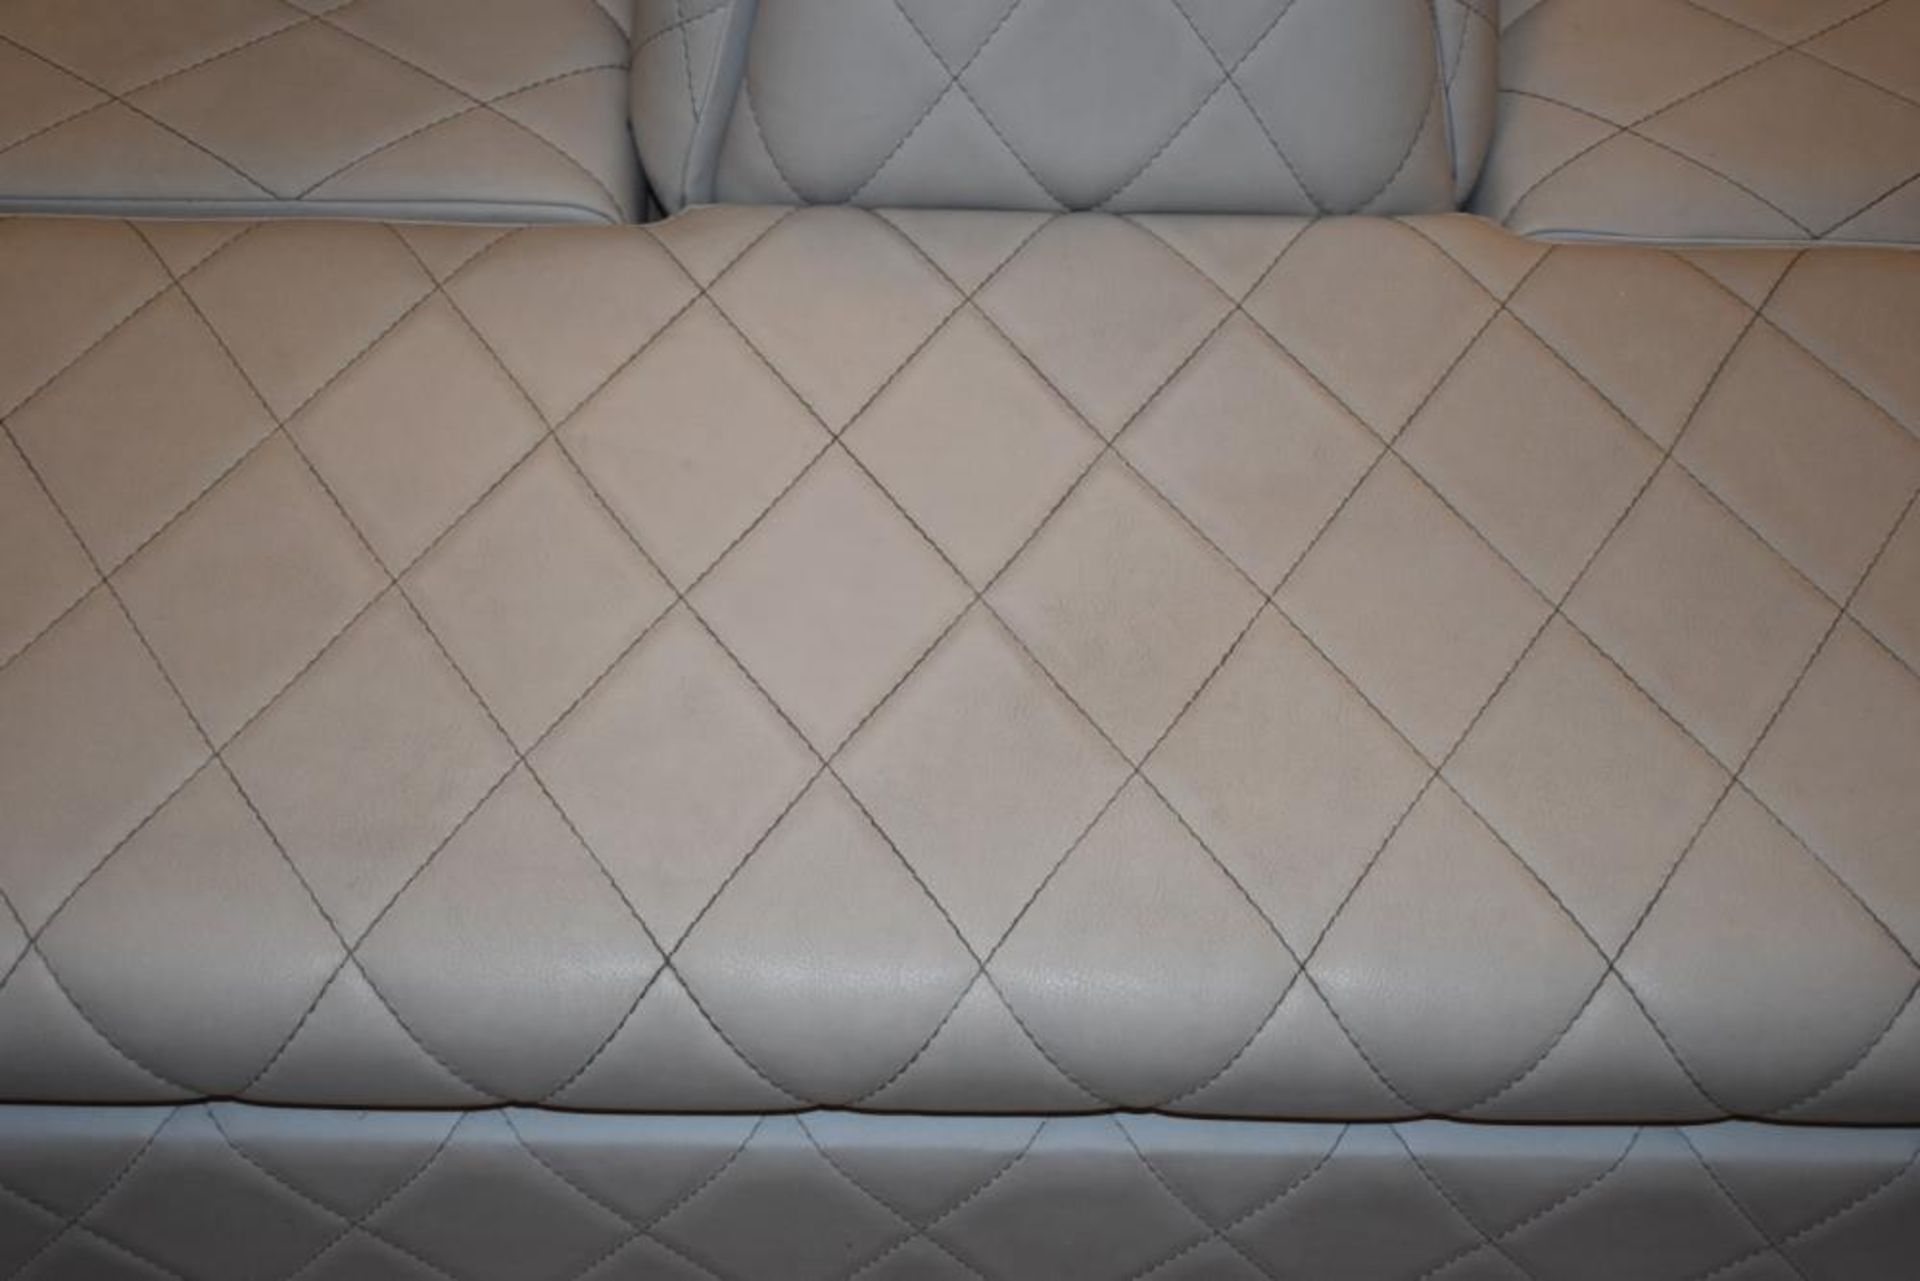 1 x Central Seating Banquette in a Contemporary Diamond Faux Grey Leather - Quality Build With Under - Image 3 of 7